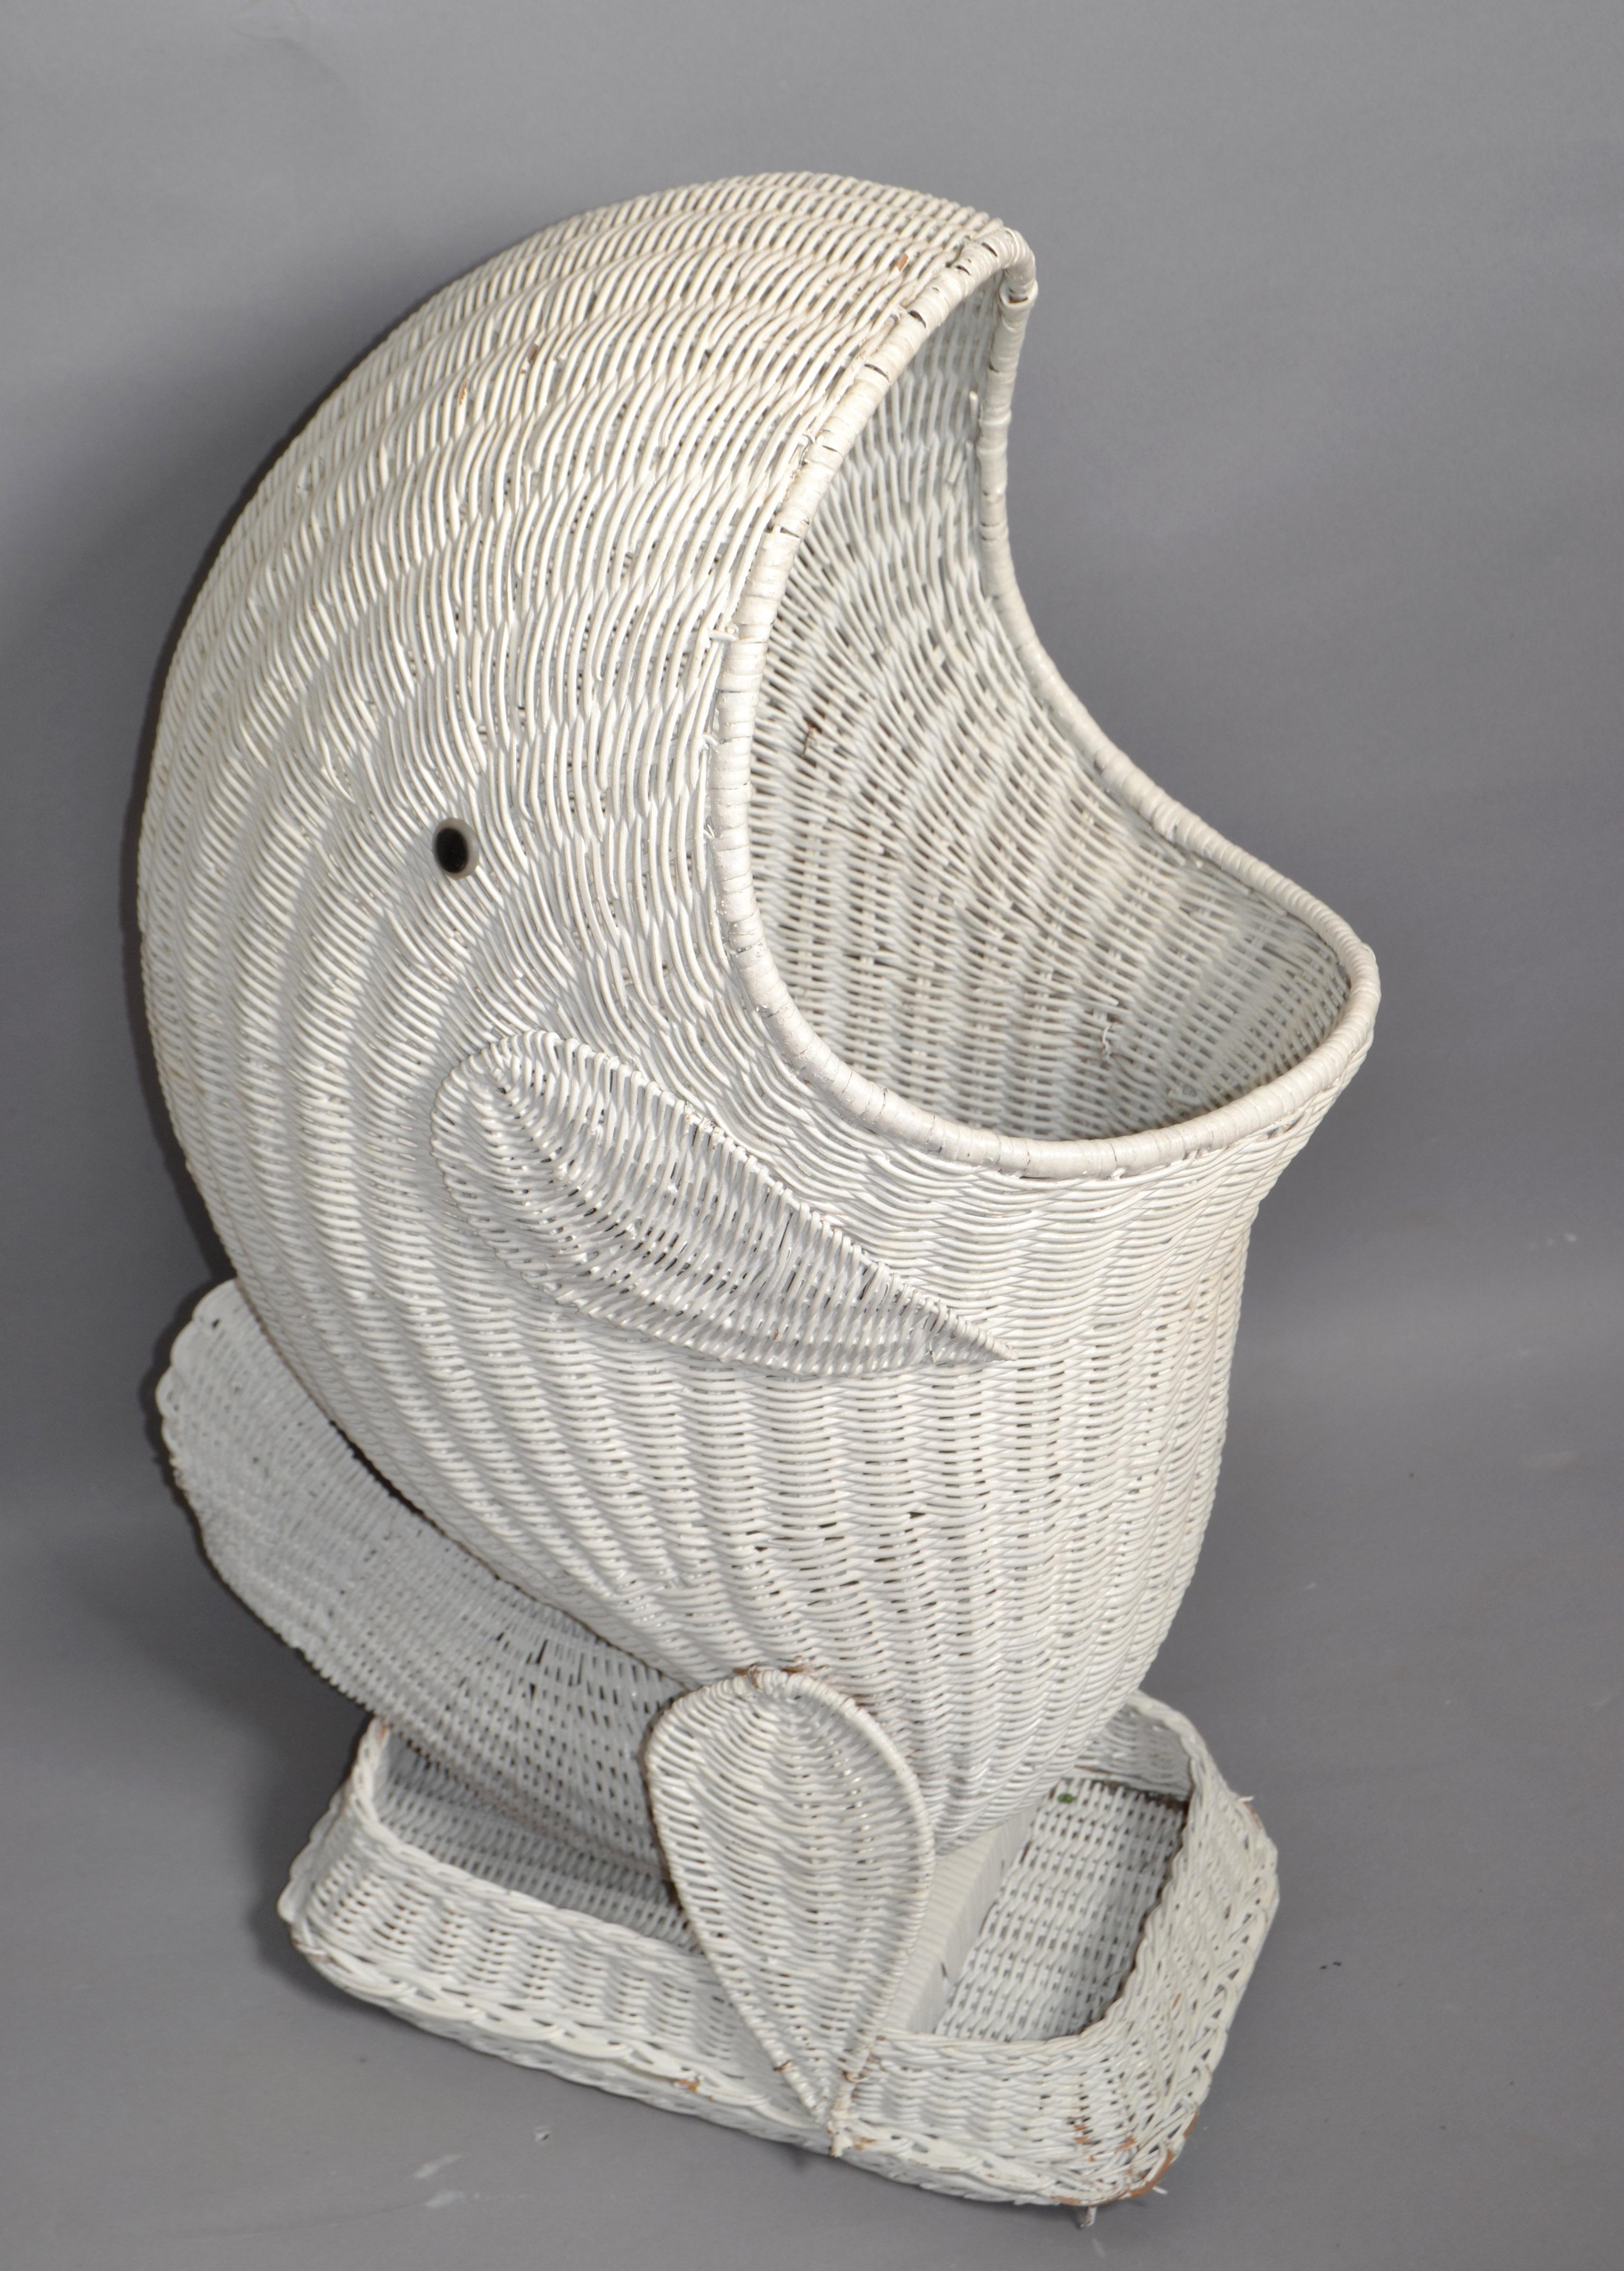 Mario Lopez Torres Style Mid-Century Modern white hand-woven Dolphin Basket, Toy Storage Vessel, Animal Sculpture.
Bohemian Style made in America in the late 20th century.
All original condition with some white marks to the Rattan and some breaks